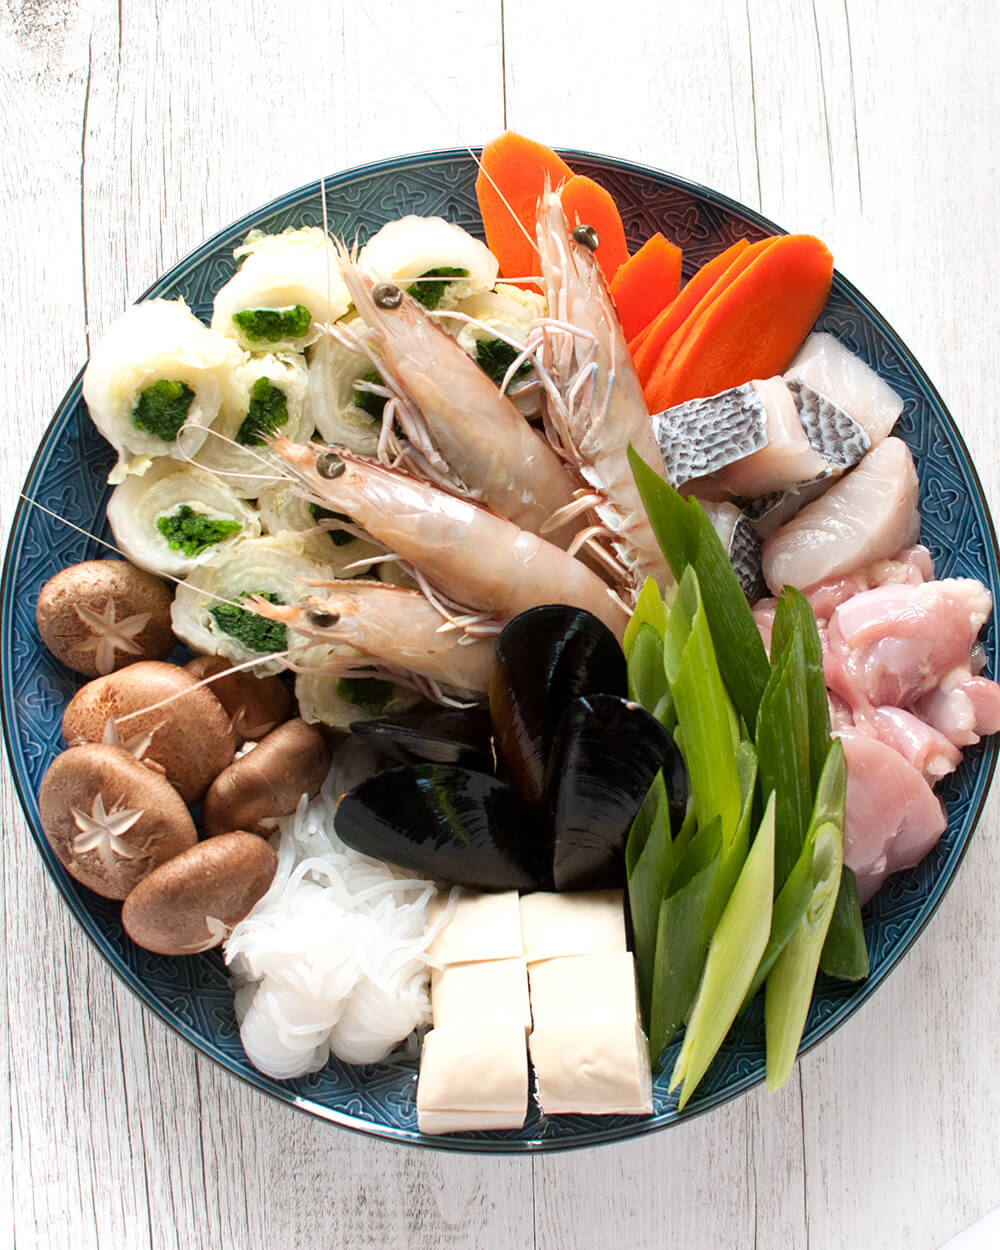 Yosenabe (寄せ鍋) is a Japanese hot pot packed with seafood, chicken and vegetables. https://japan.recipetineats.com